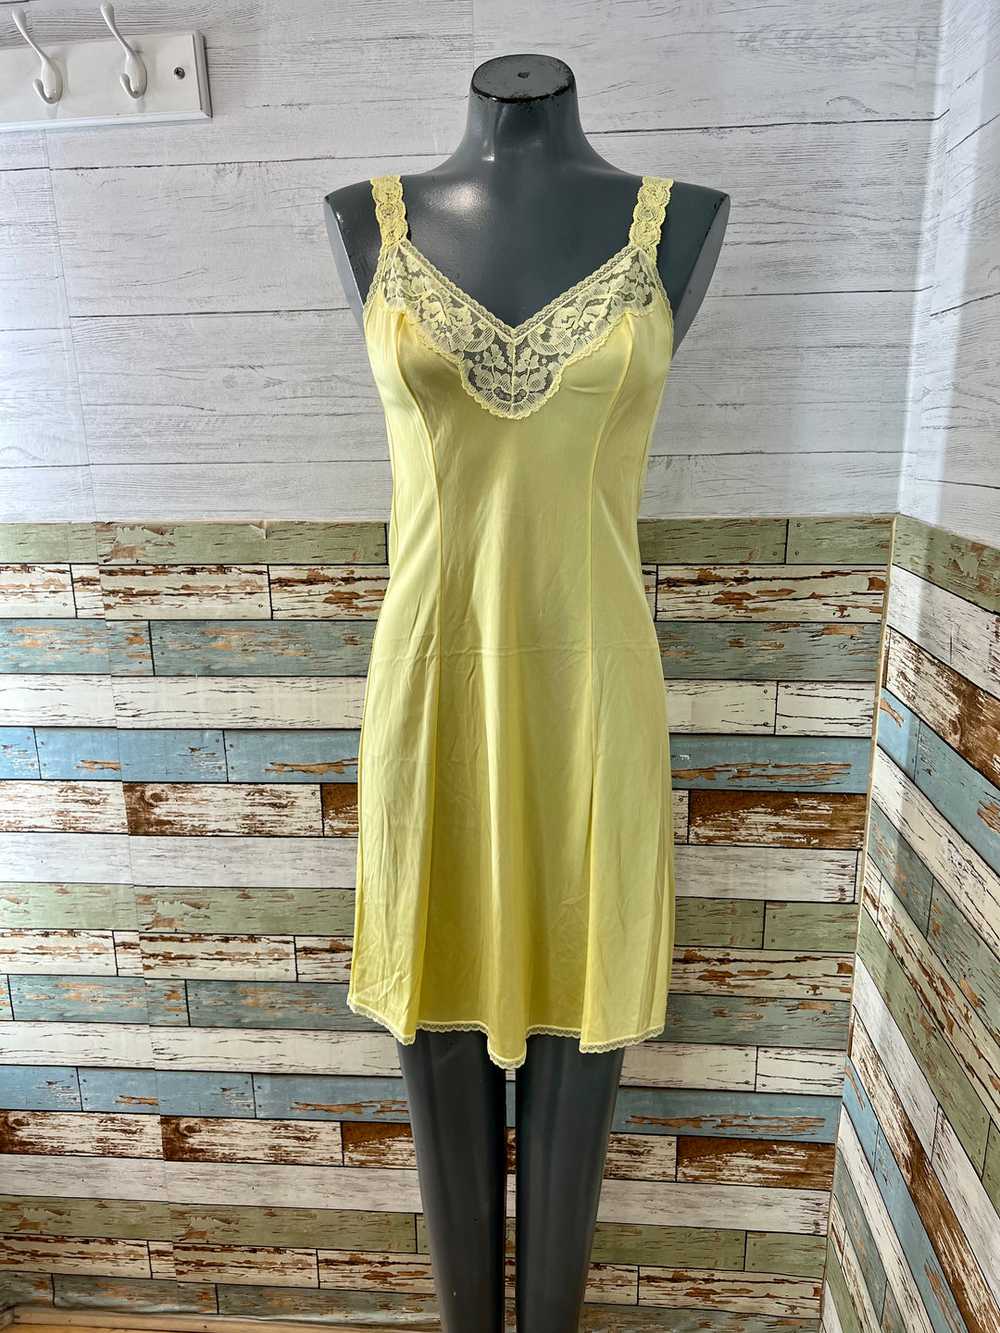 70’s Yellow Slip Dress with Lace - image 1